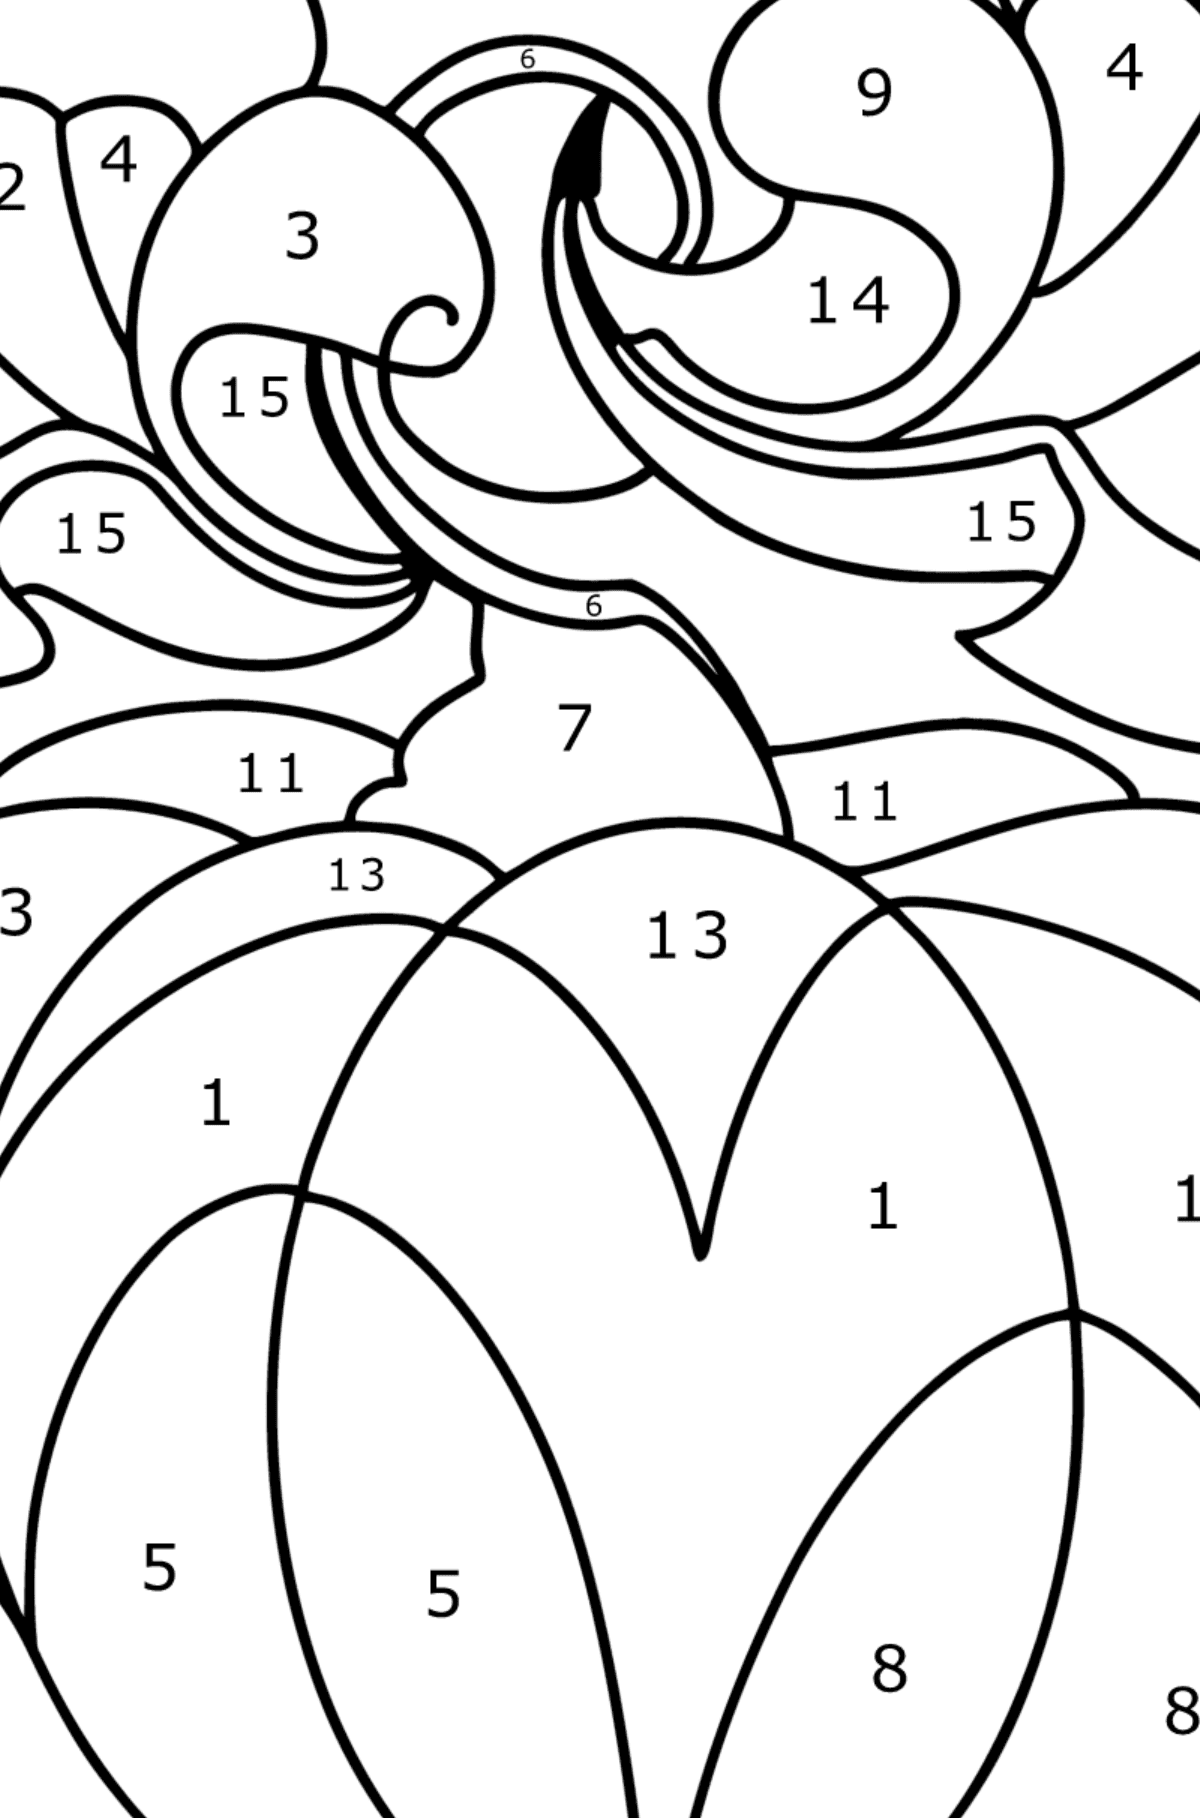 Calming Anti stress Pumpkin coloring page - Coloring by Numbers for Kids